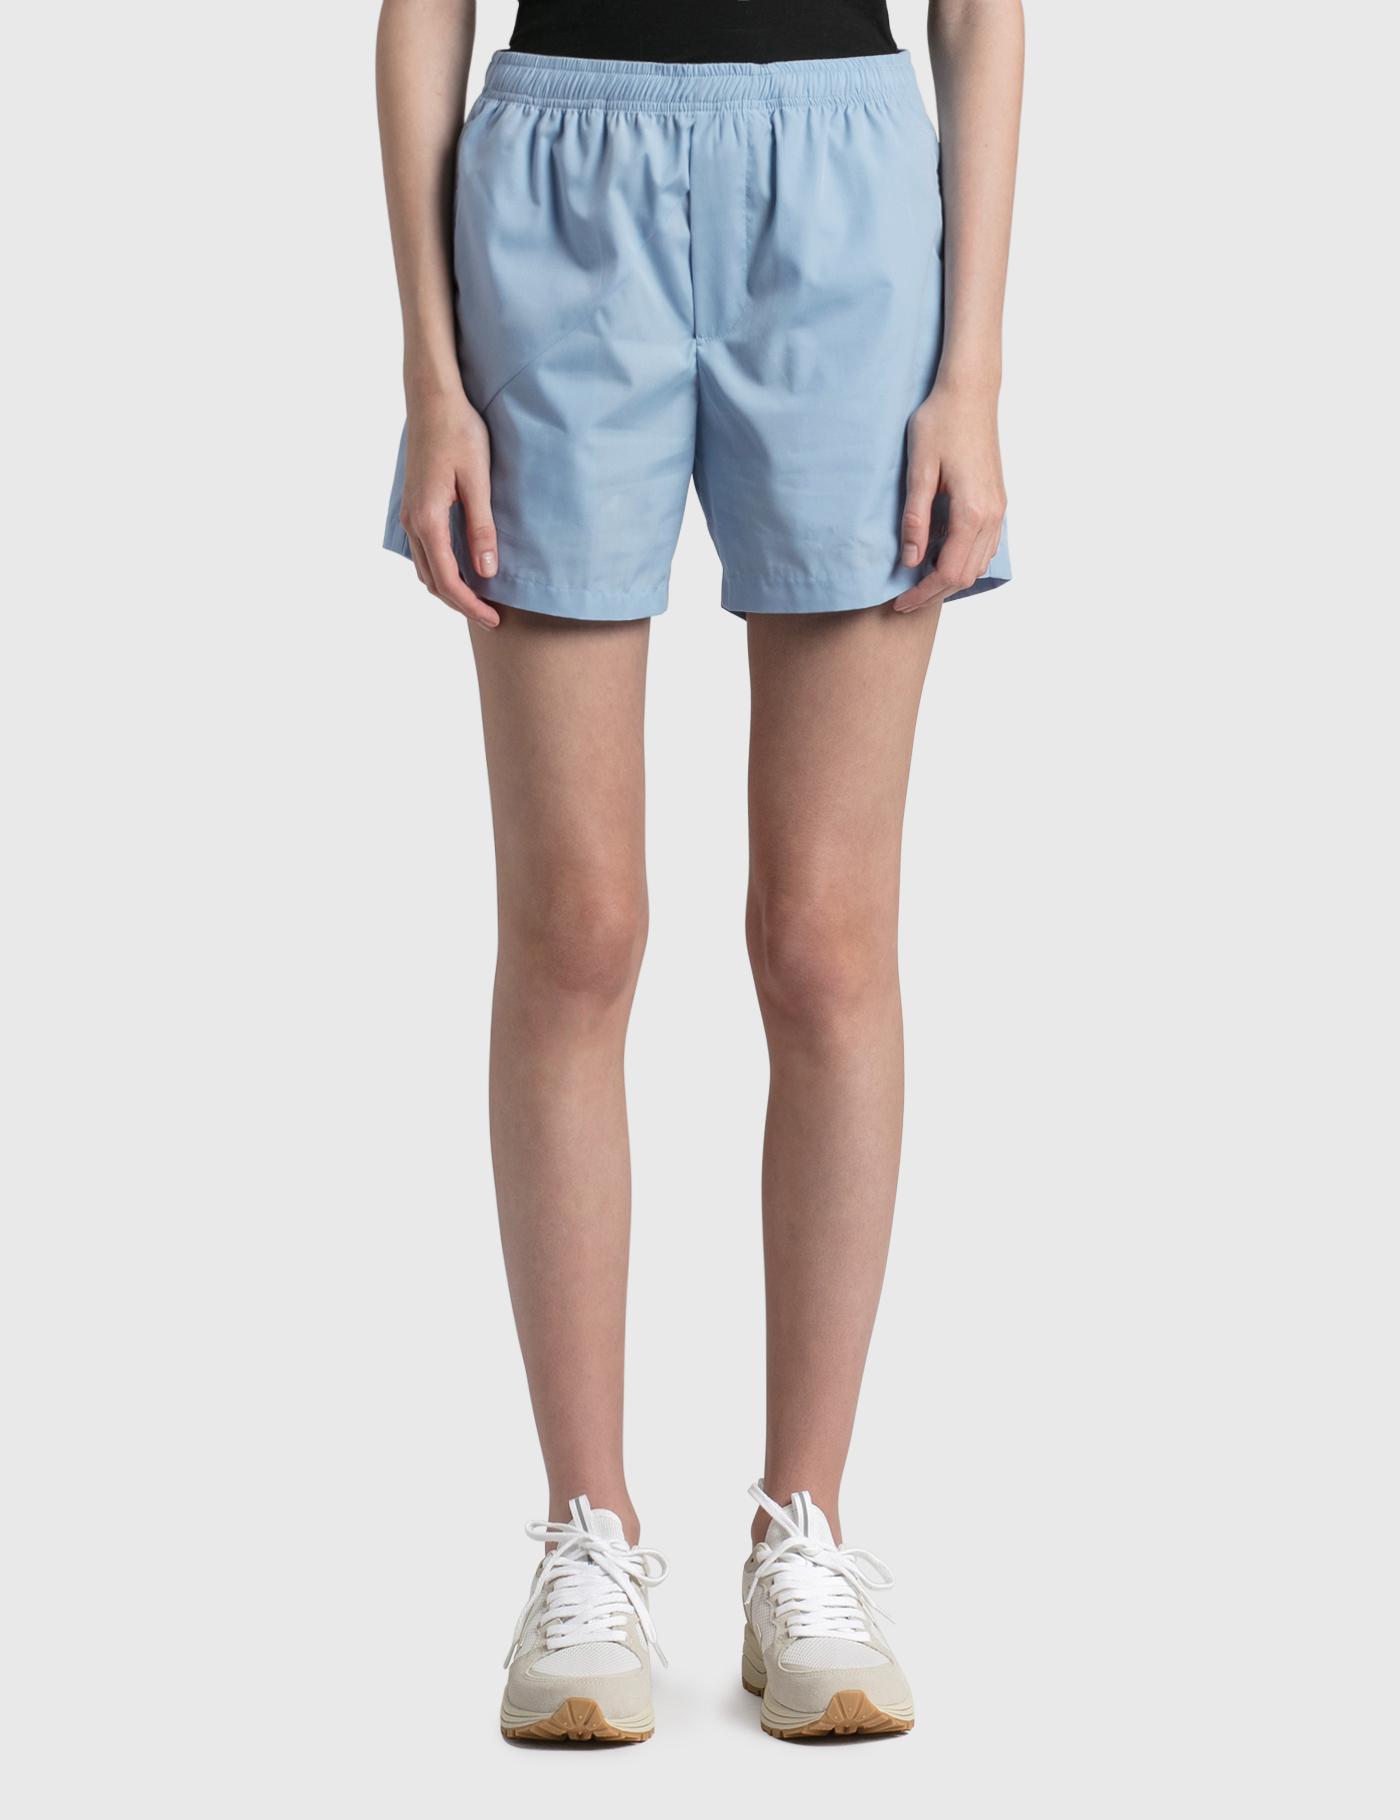 Deconstructed Cotton Shorts by DANIELLE CATHARI